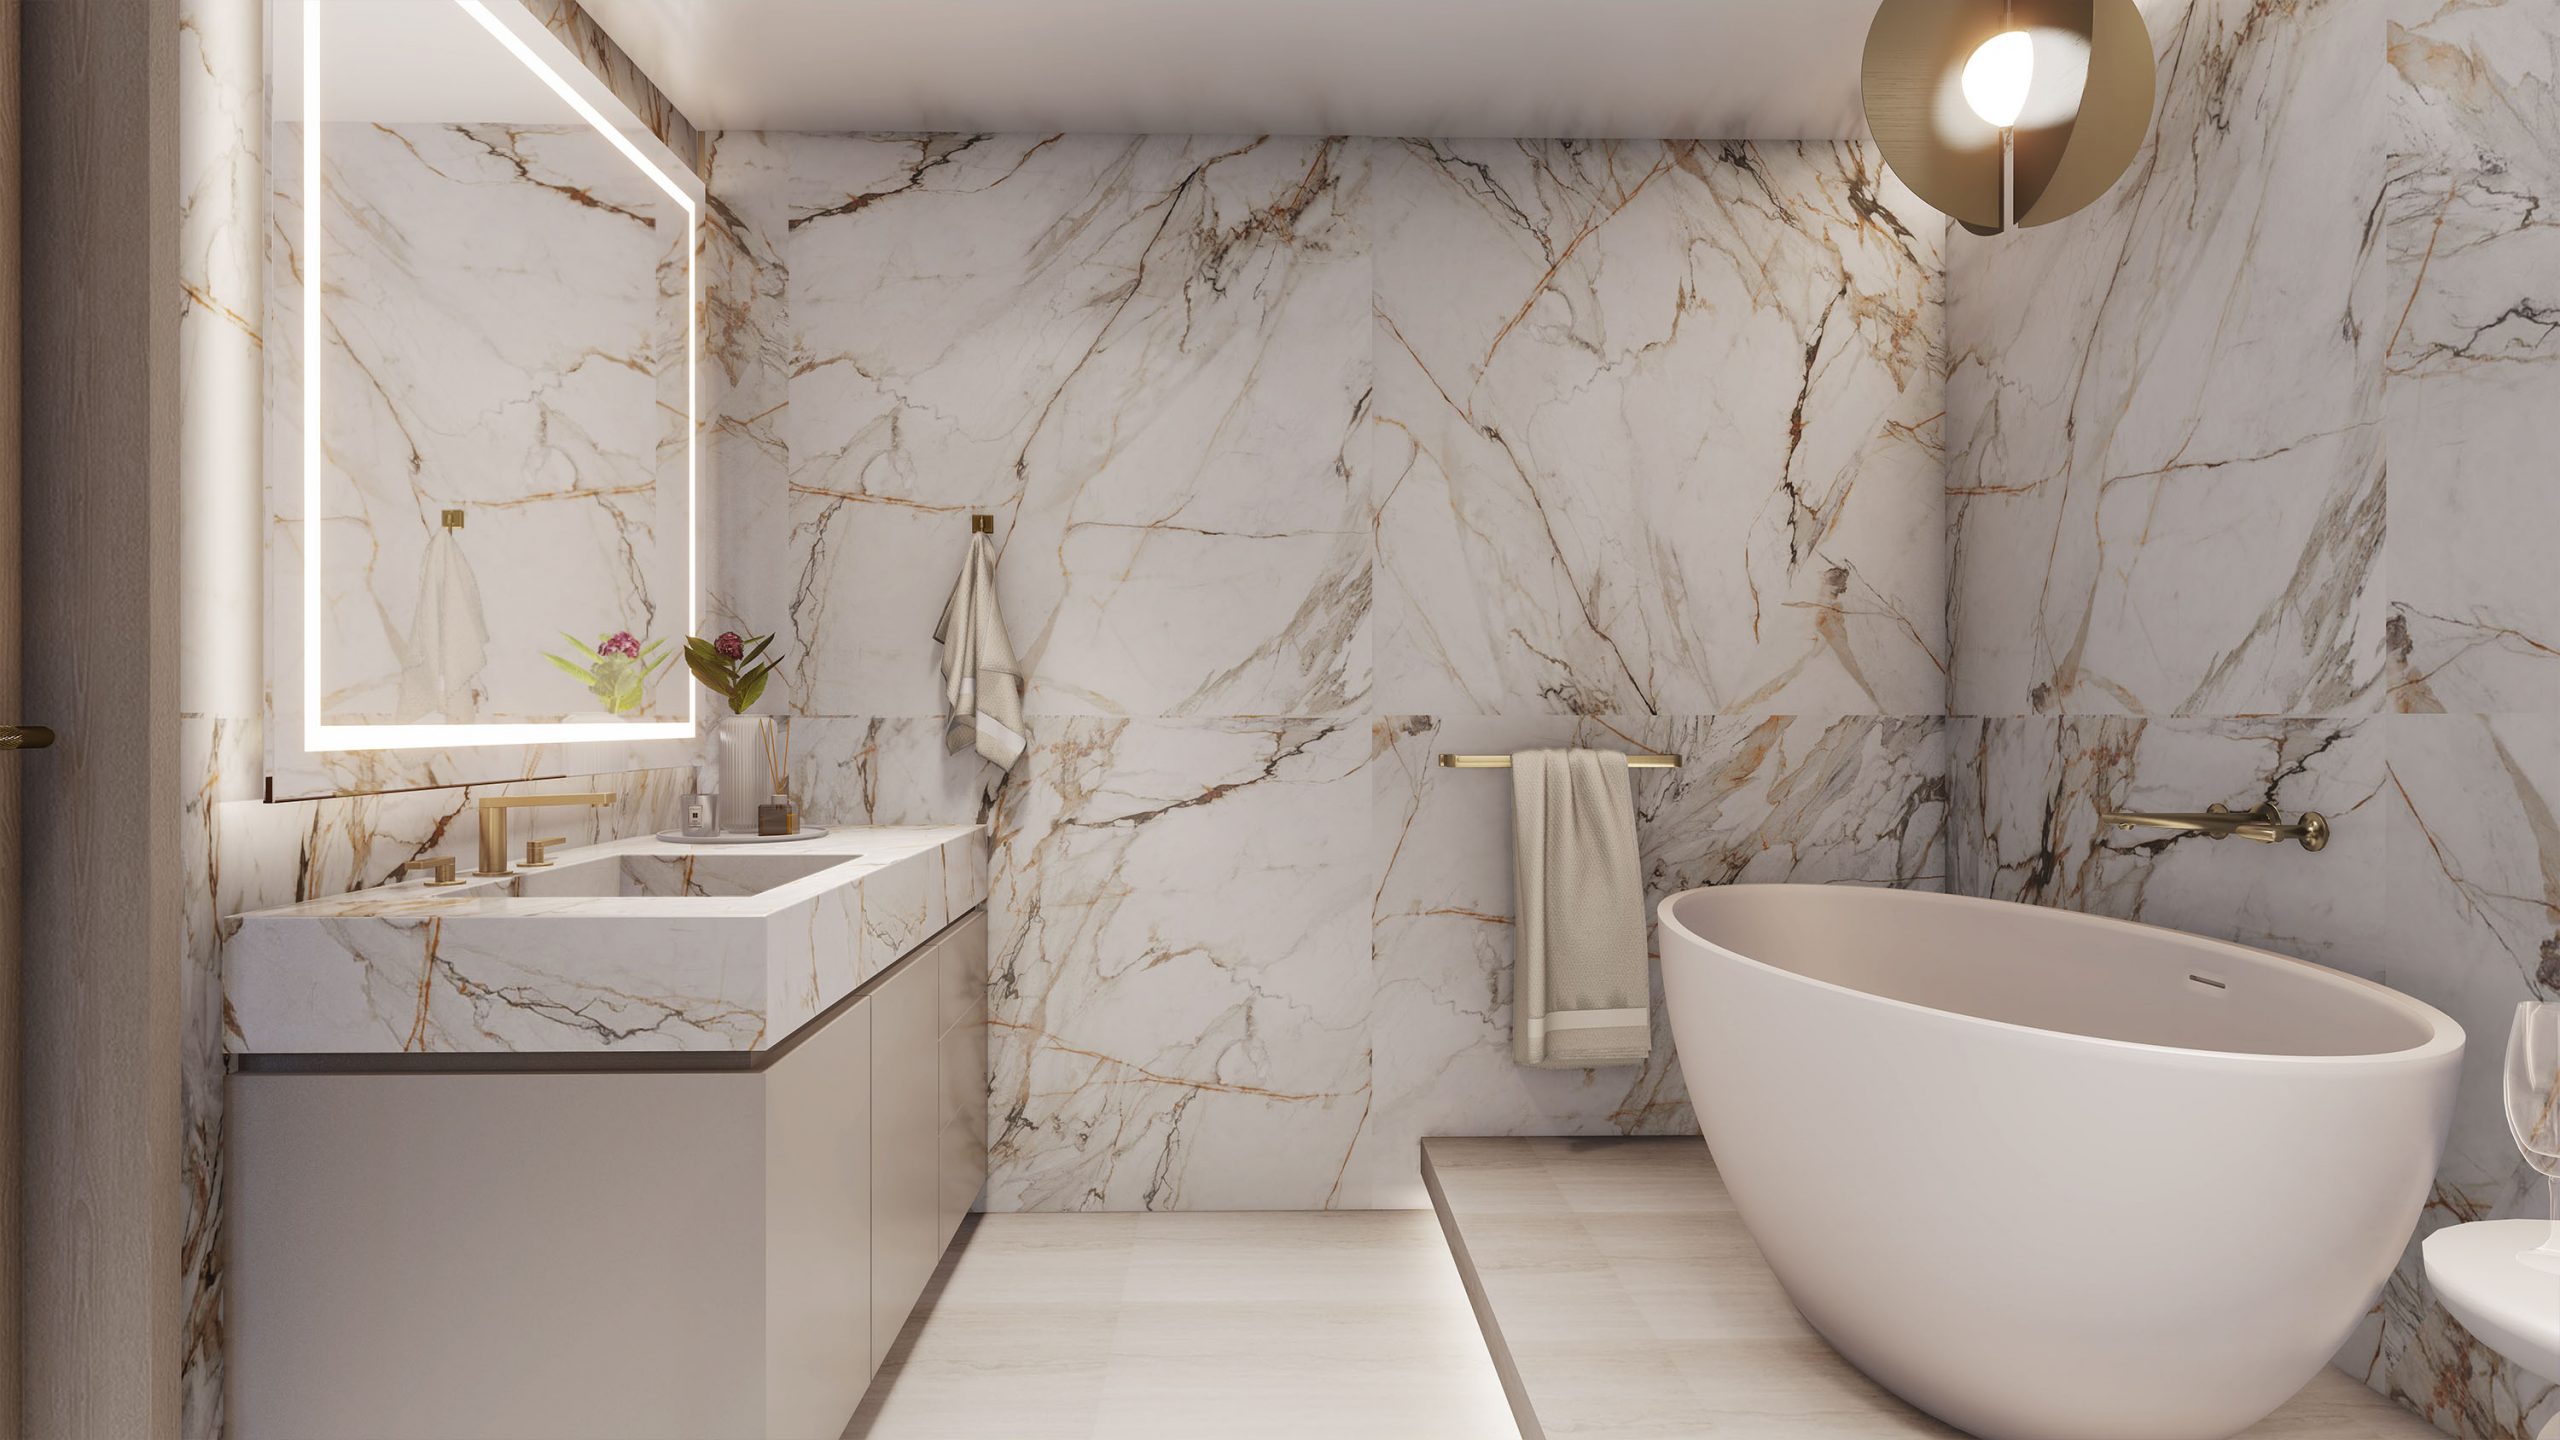 Stylish bathroom in like colors with travertine floor and busy white marble walls with golden veins, white countertop, large mirror, freestanding bathtub, gold light fixtures and frosted glass shower enclosure